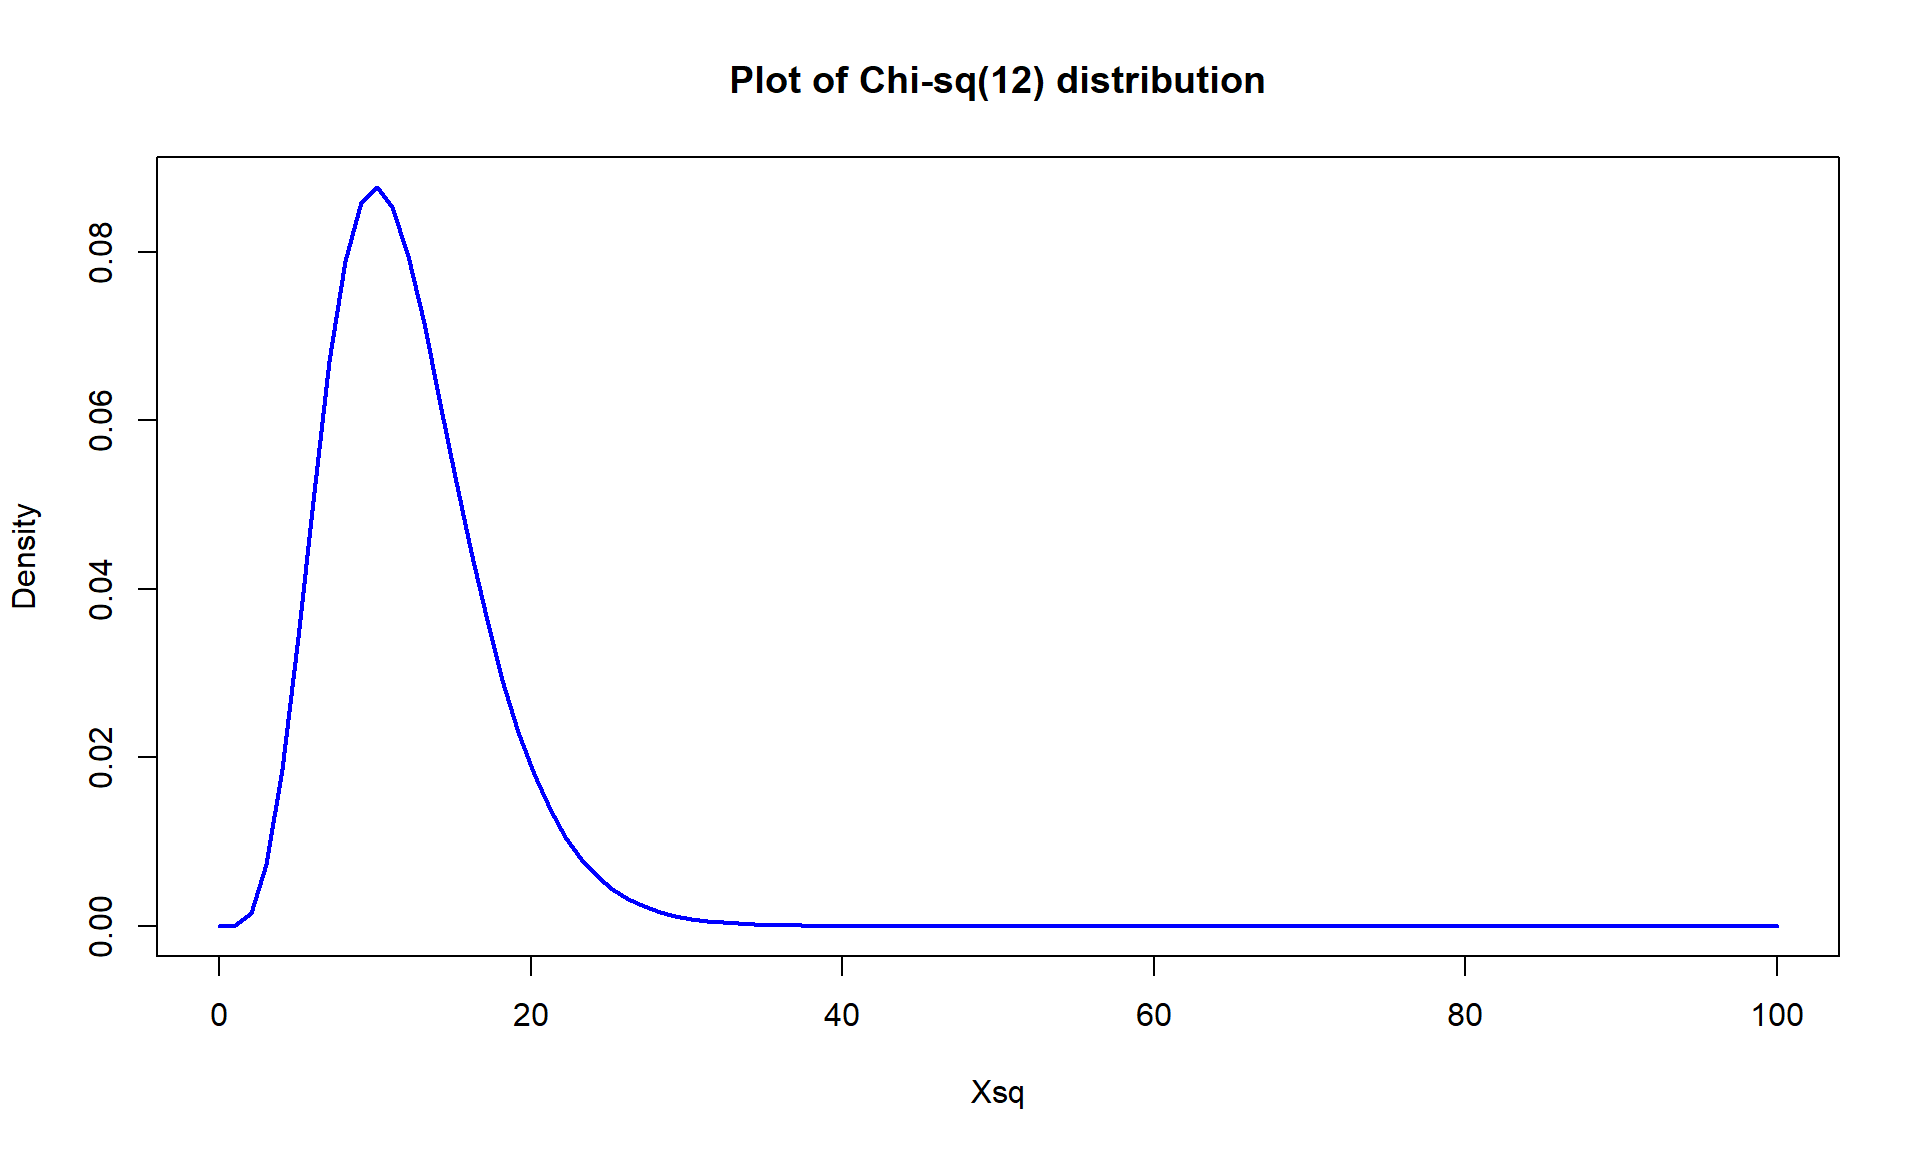 Plot of $\boldsymbol{\chi^2}$-distribution with 12 degrees of freedom.